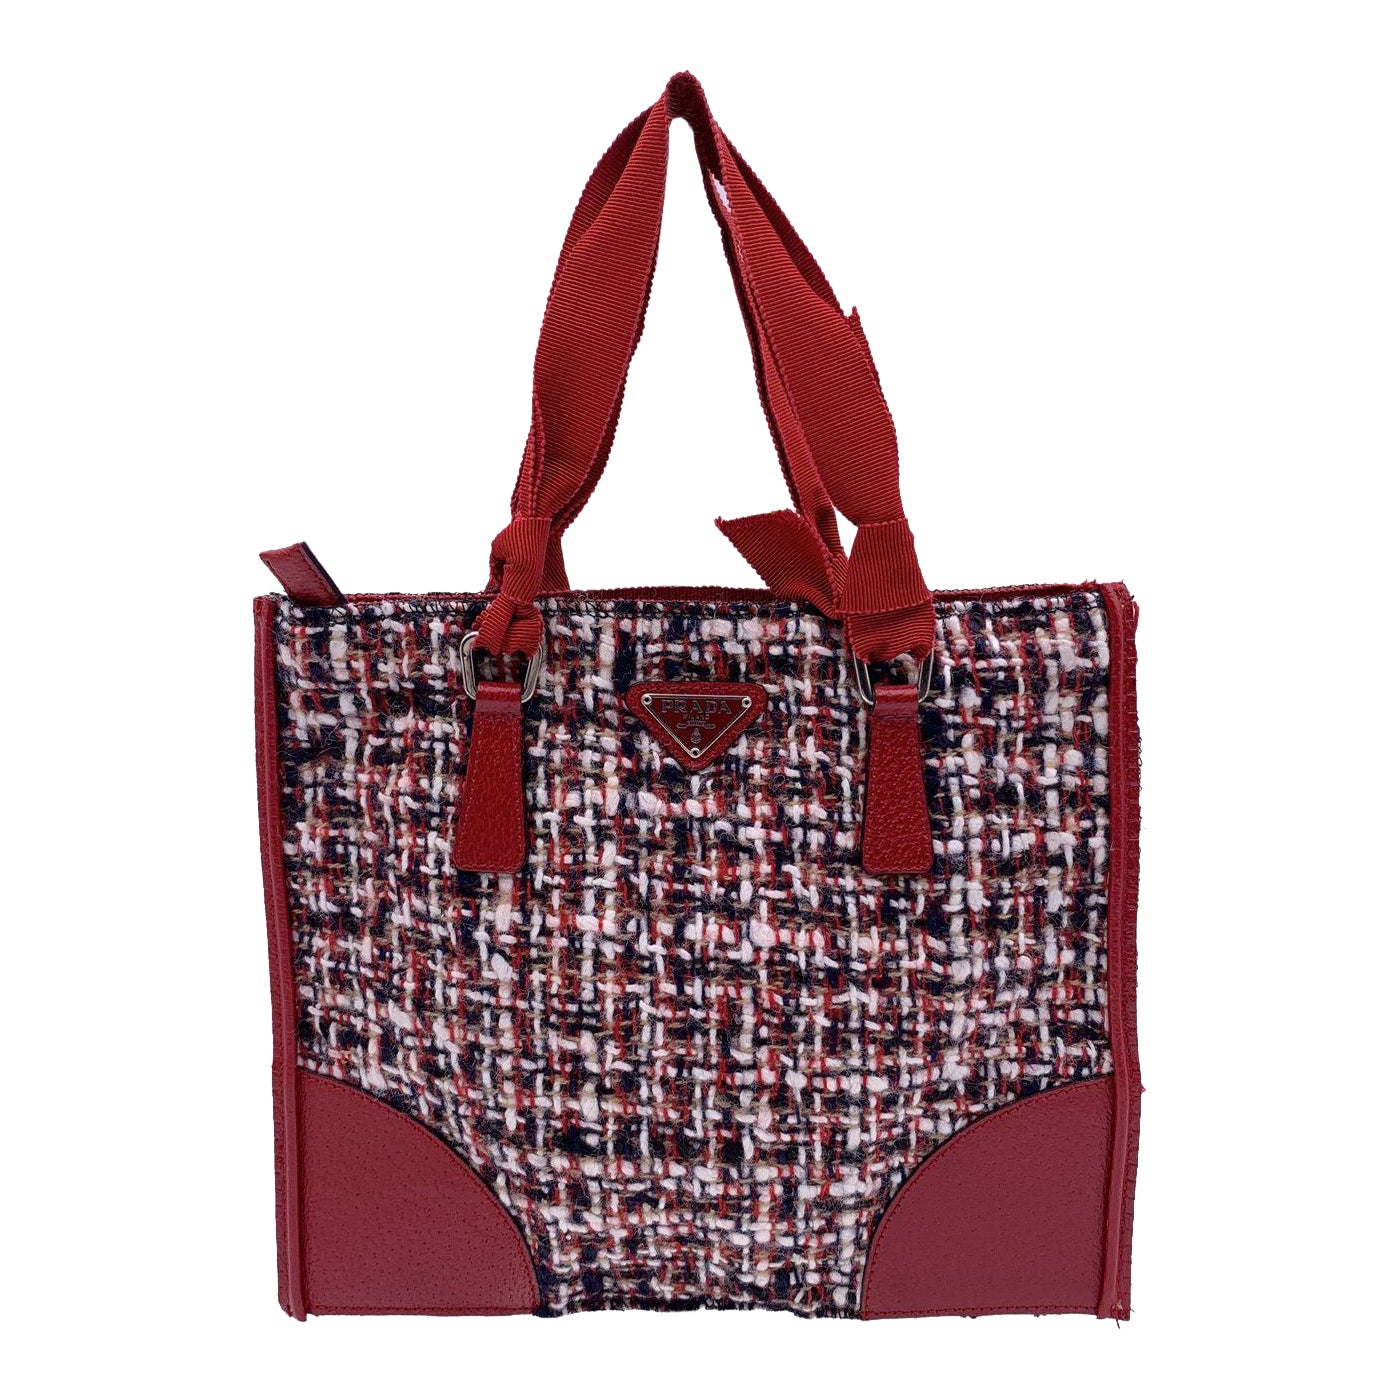 Prada Red Tweed and Leather Small Flat Tote Handbag Satchel For Sale